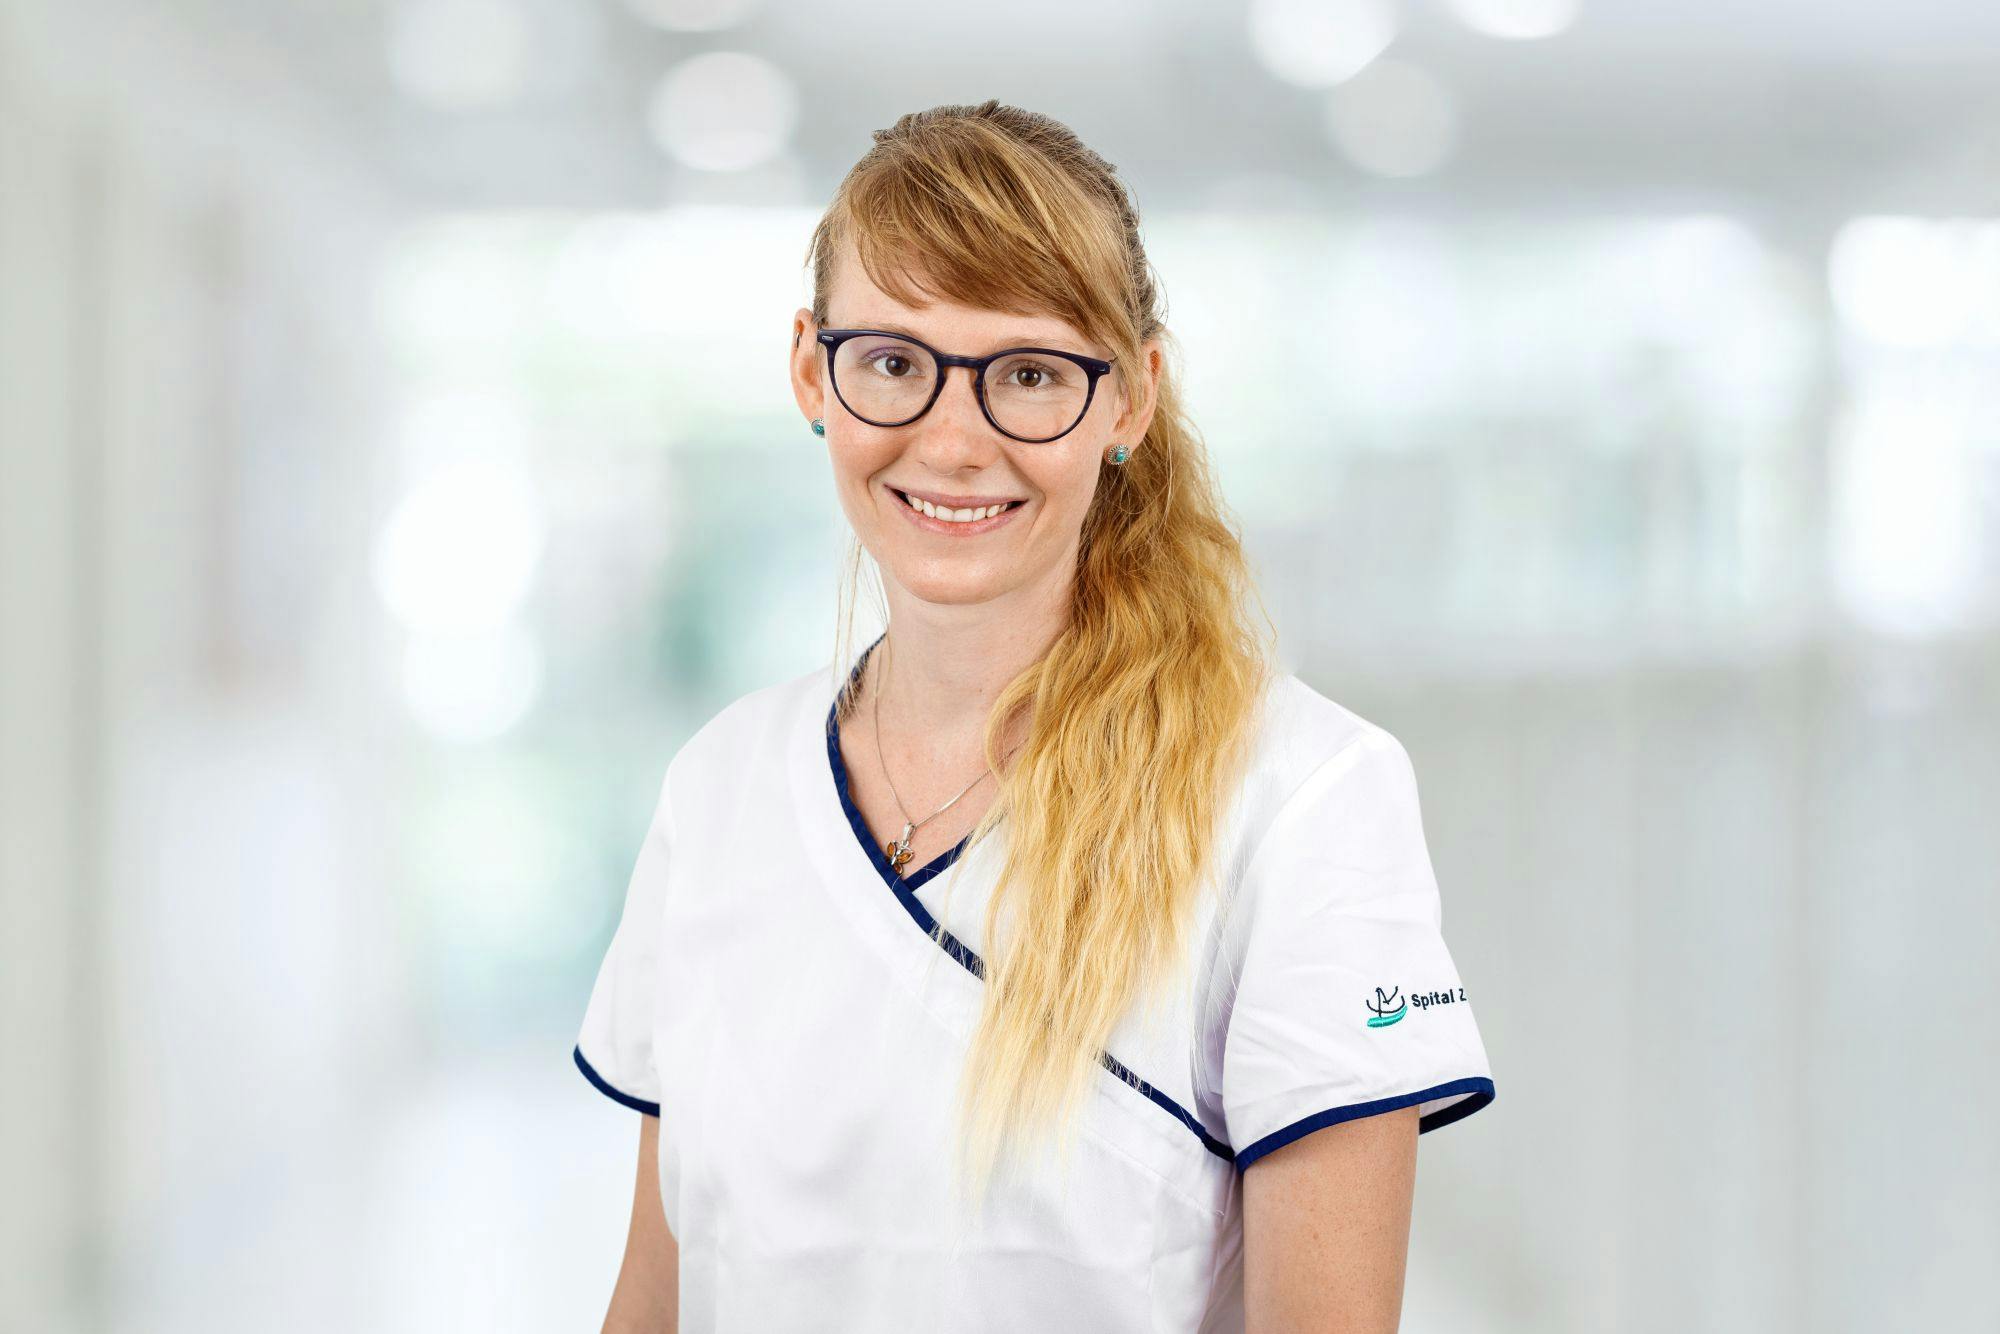 Smiling woman in medical professional clothing with glasses and braided hair.